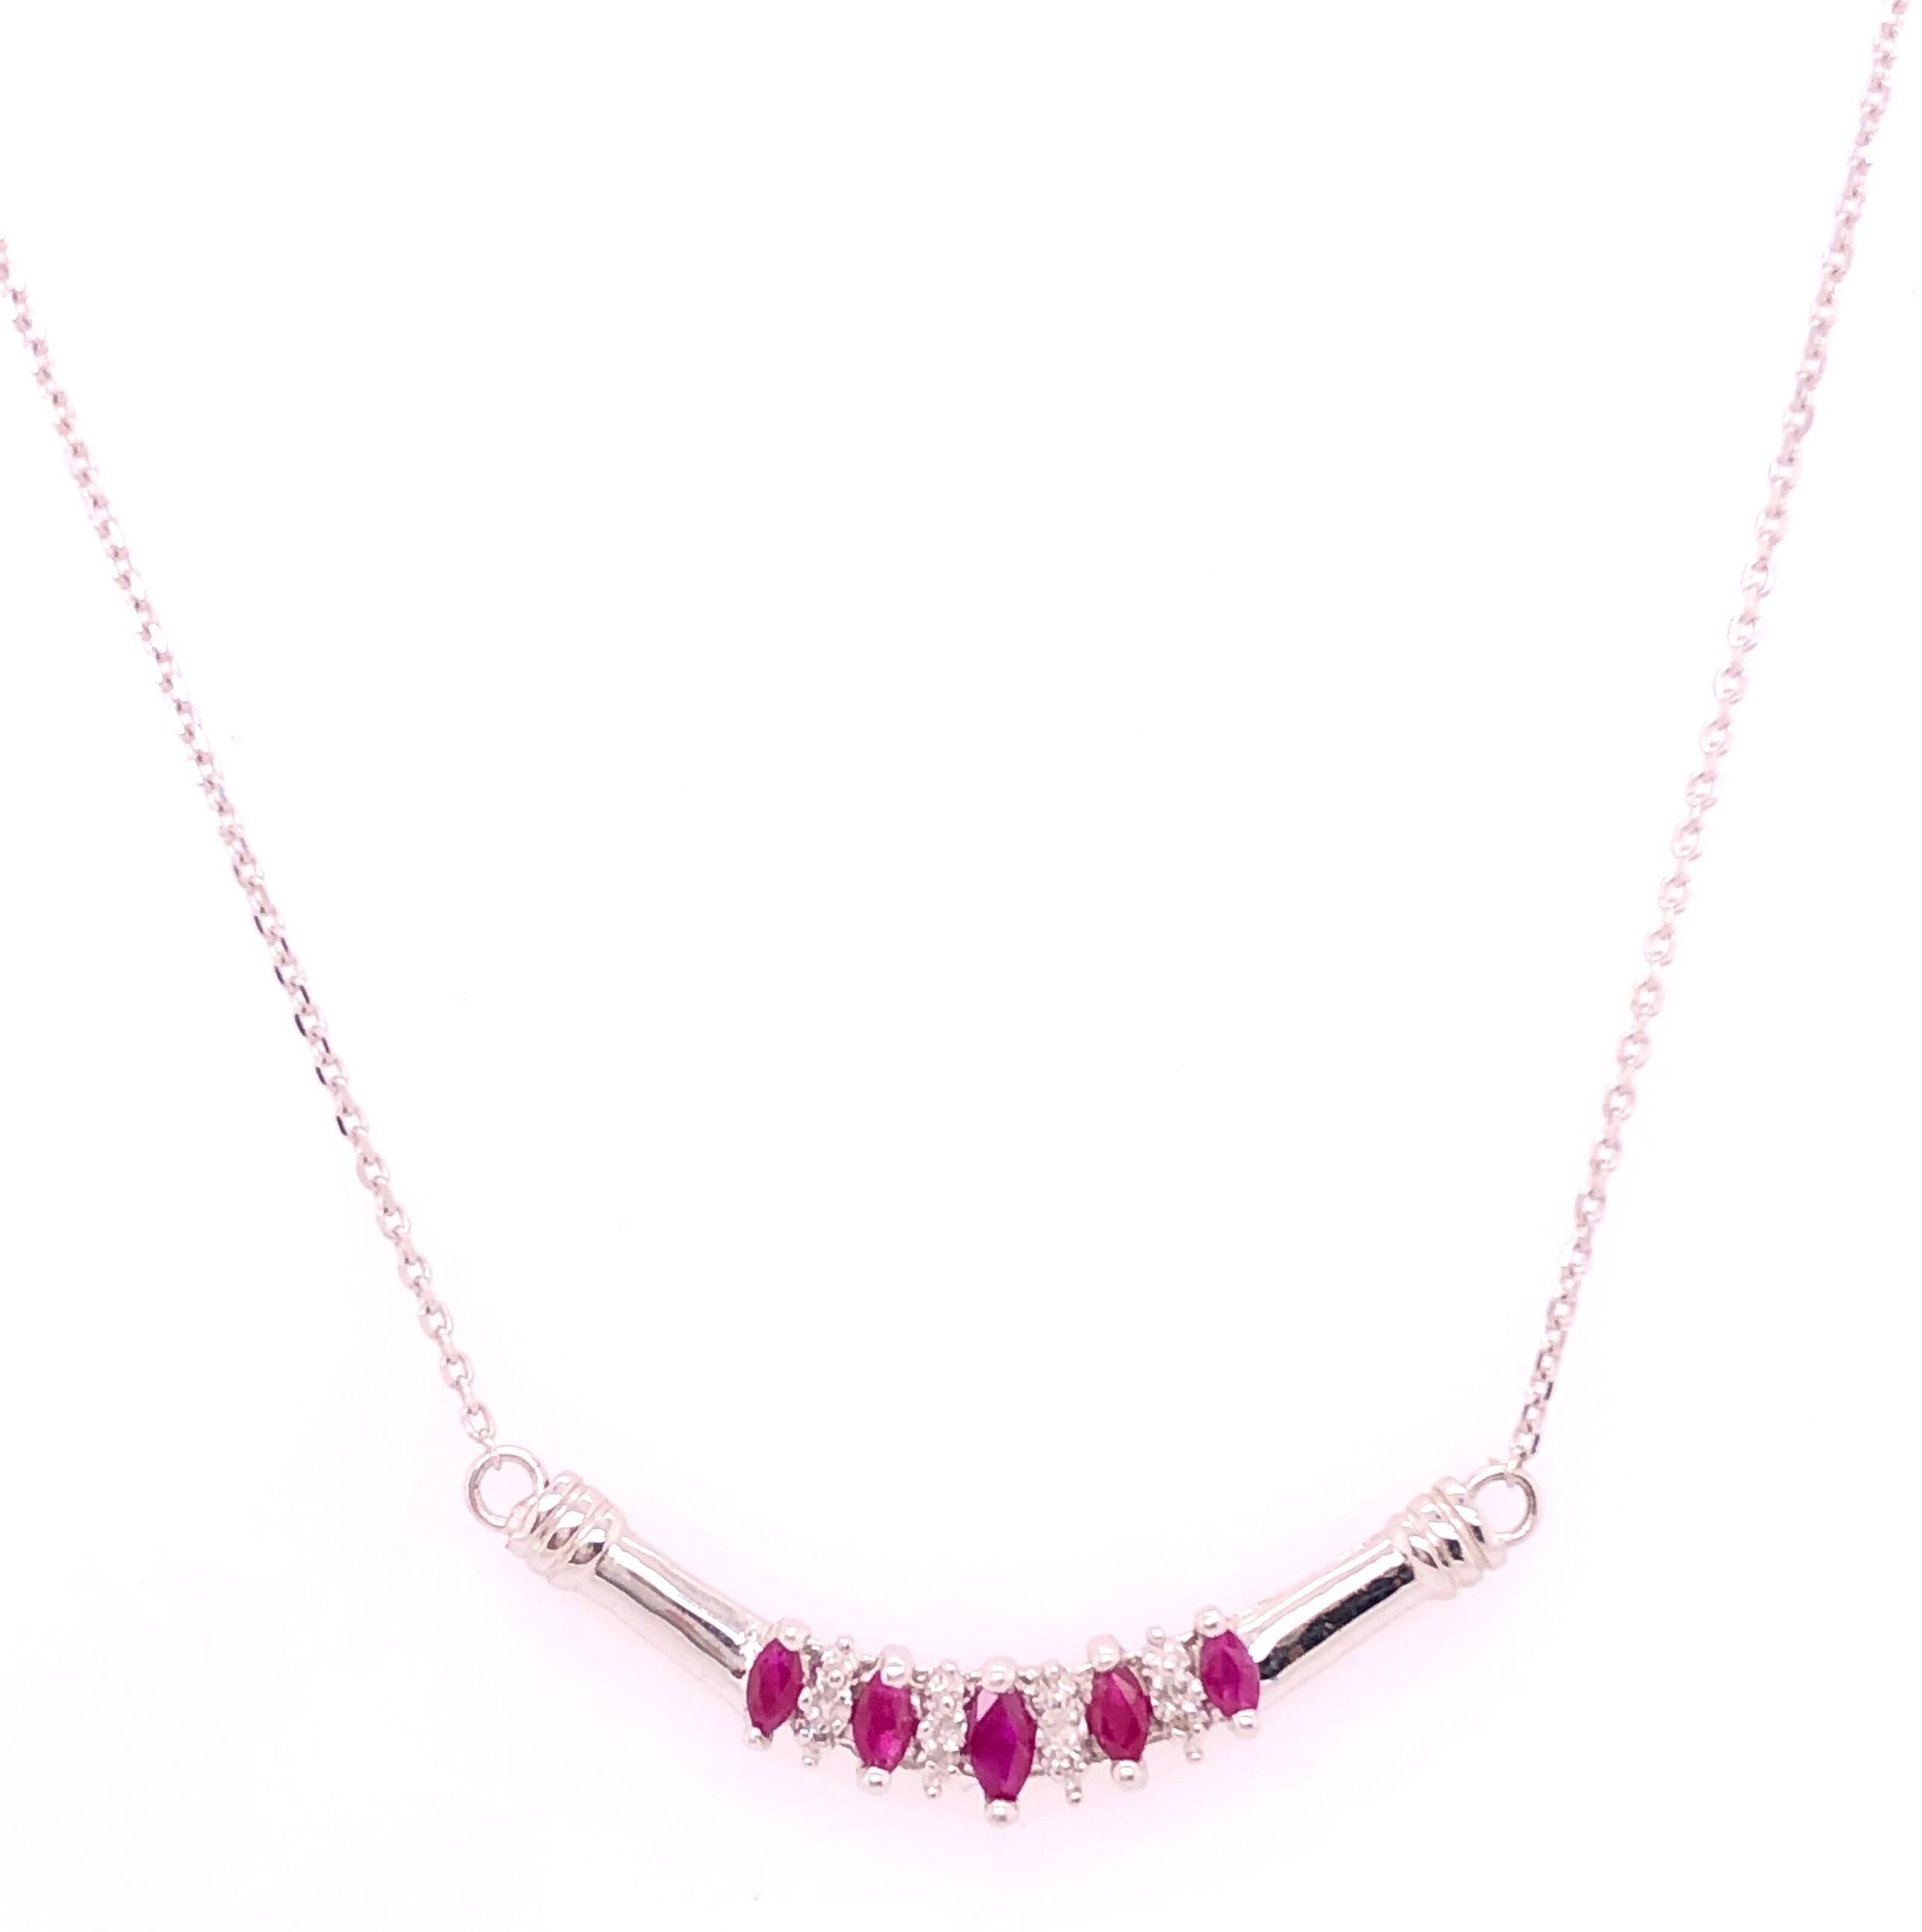 14Kt White Gold Cable Necklace W/ Ruby And Diamond Soldered Pendant 0.10 TDW
18 Inch 
3.09 grams total weight